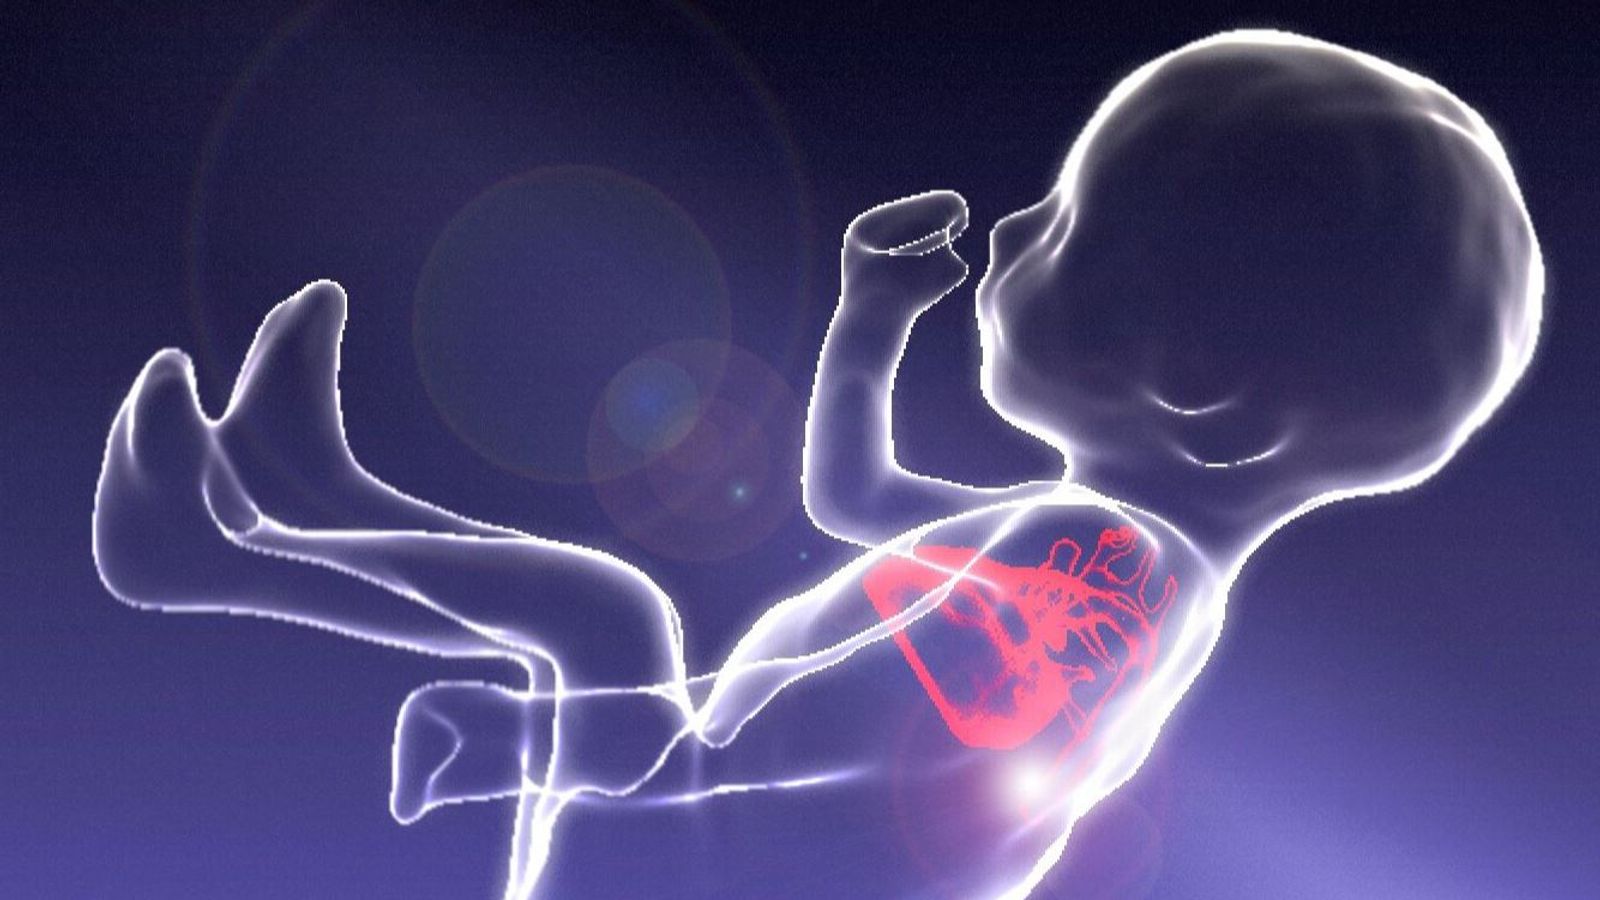 Groundbreaking images of unborn baby in womb Science & Tech News